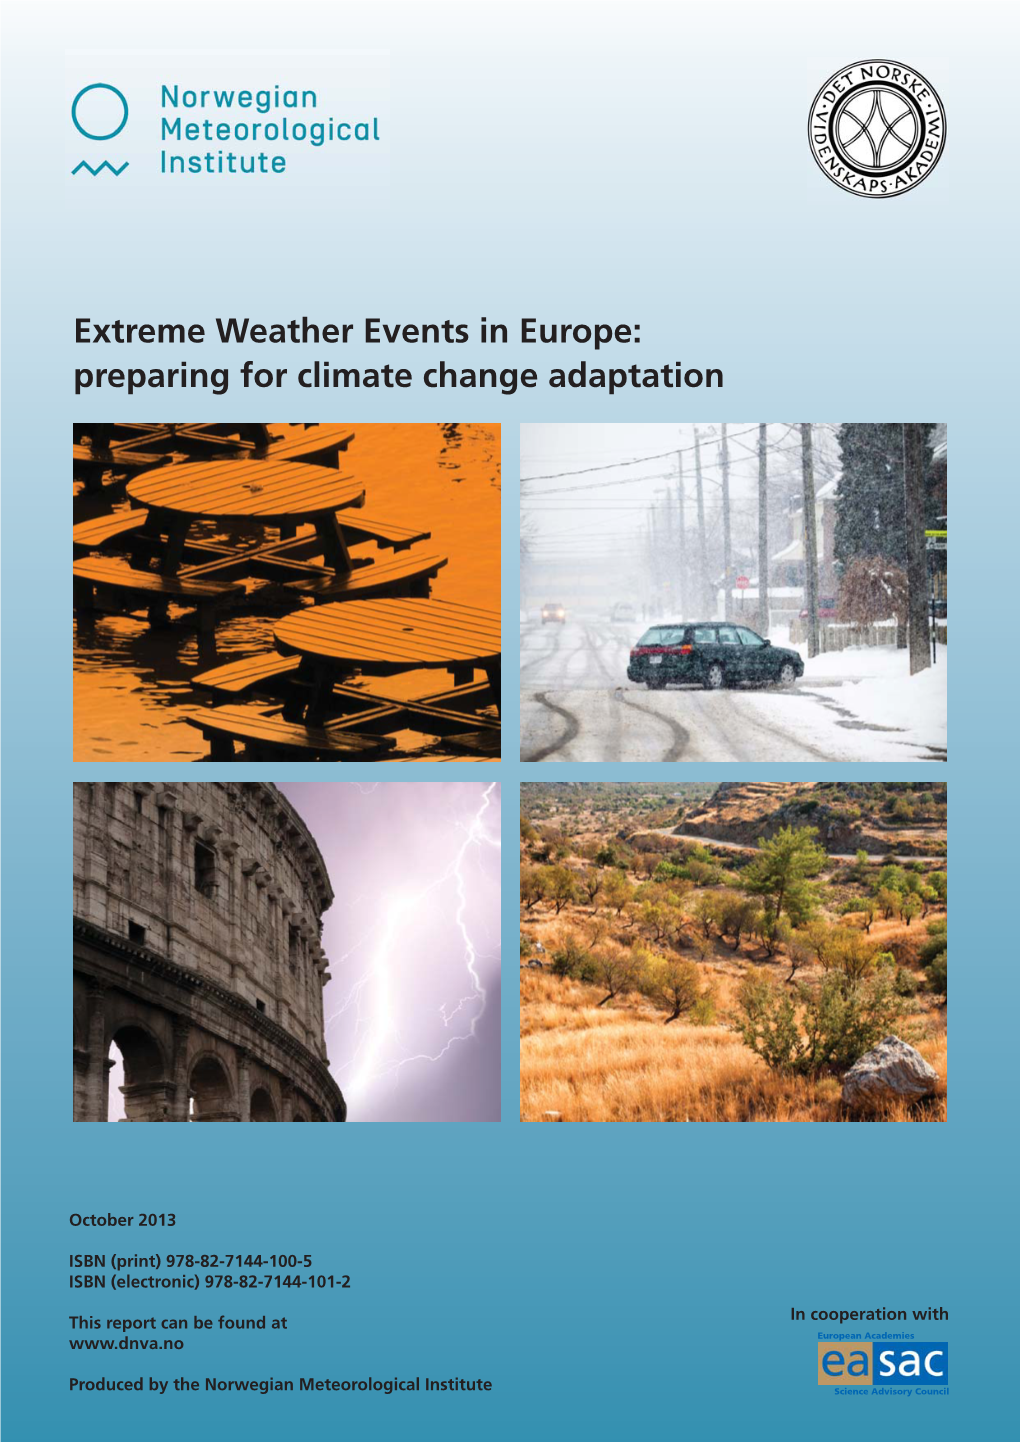 Extreme Weather Events in Europe: Preparing for Climate Change Adaptation